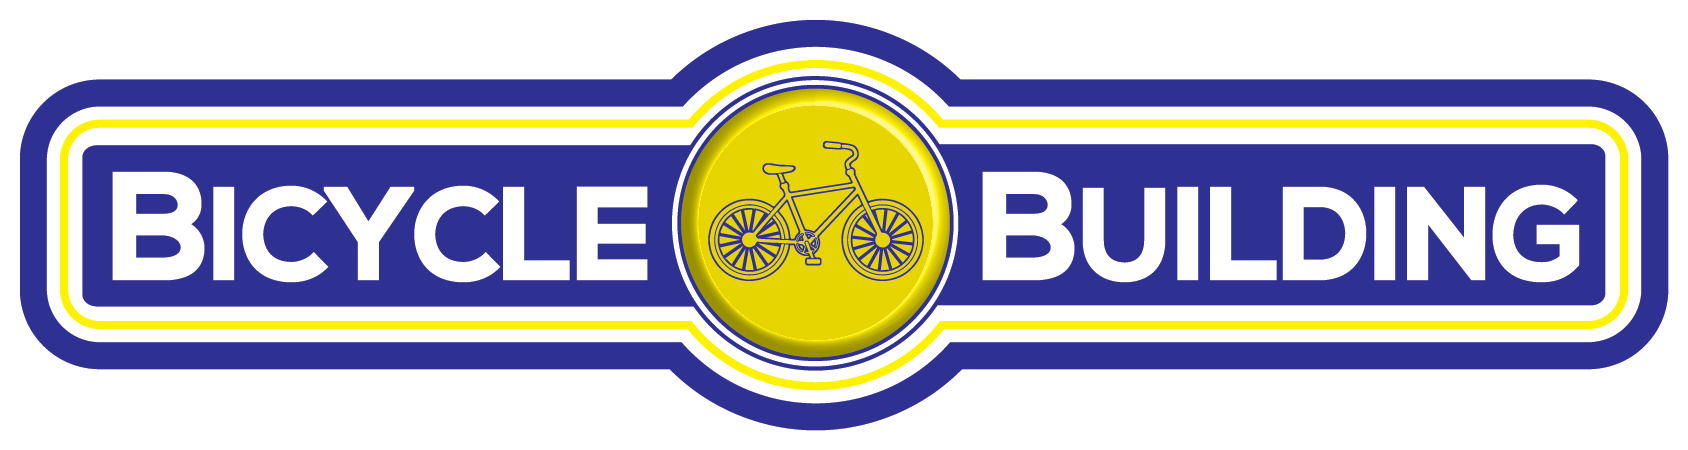 Bicycle Building